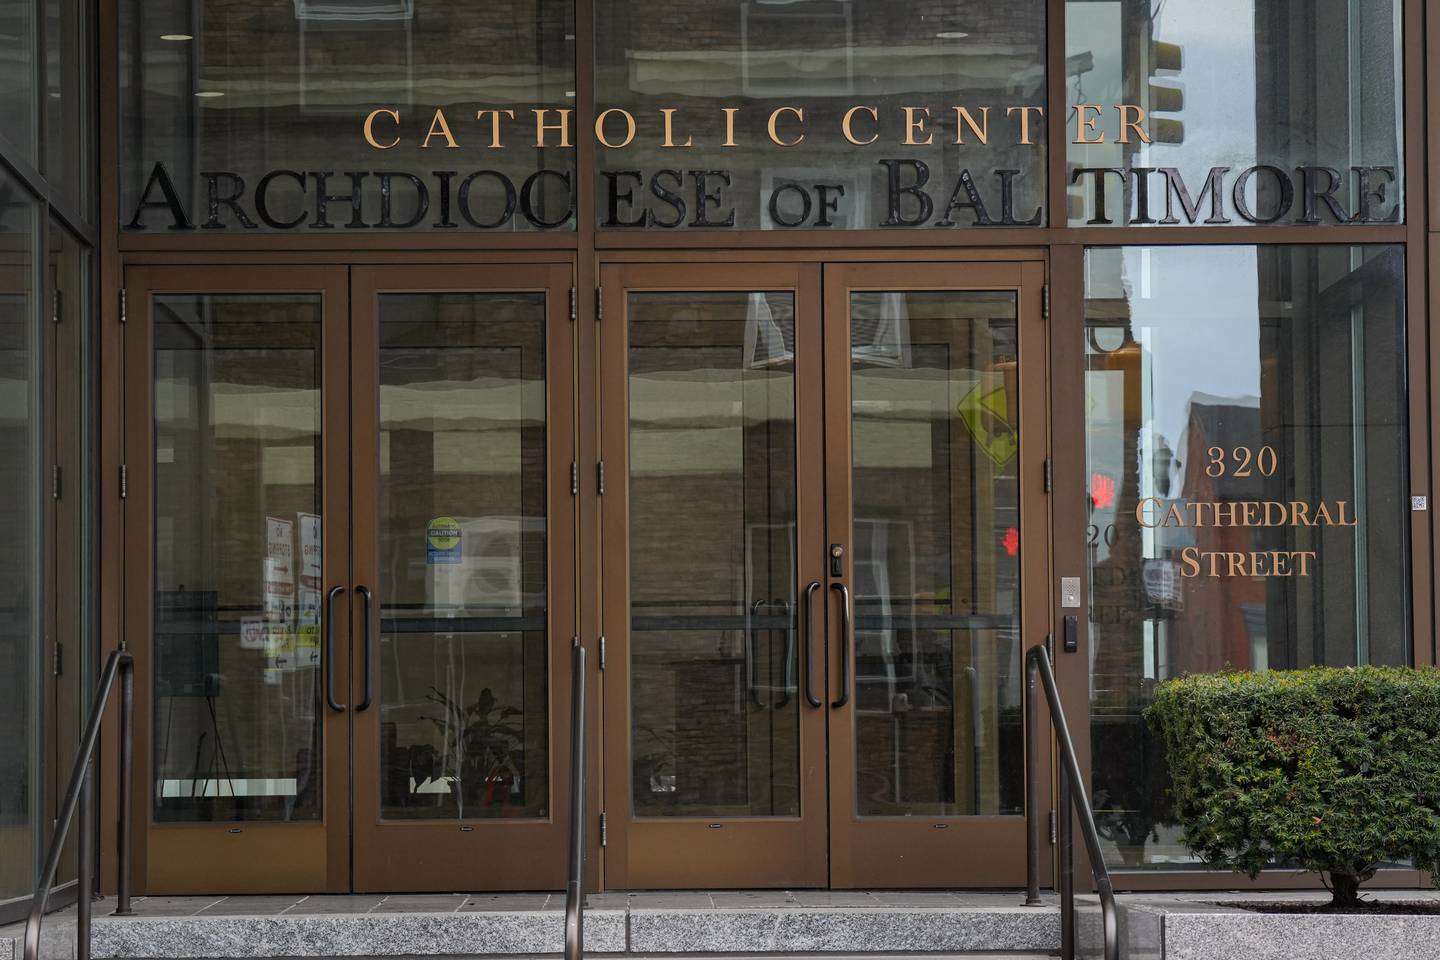 The exterior of the Archdiocese of Baltimore building as seen on Monday, March 13.